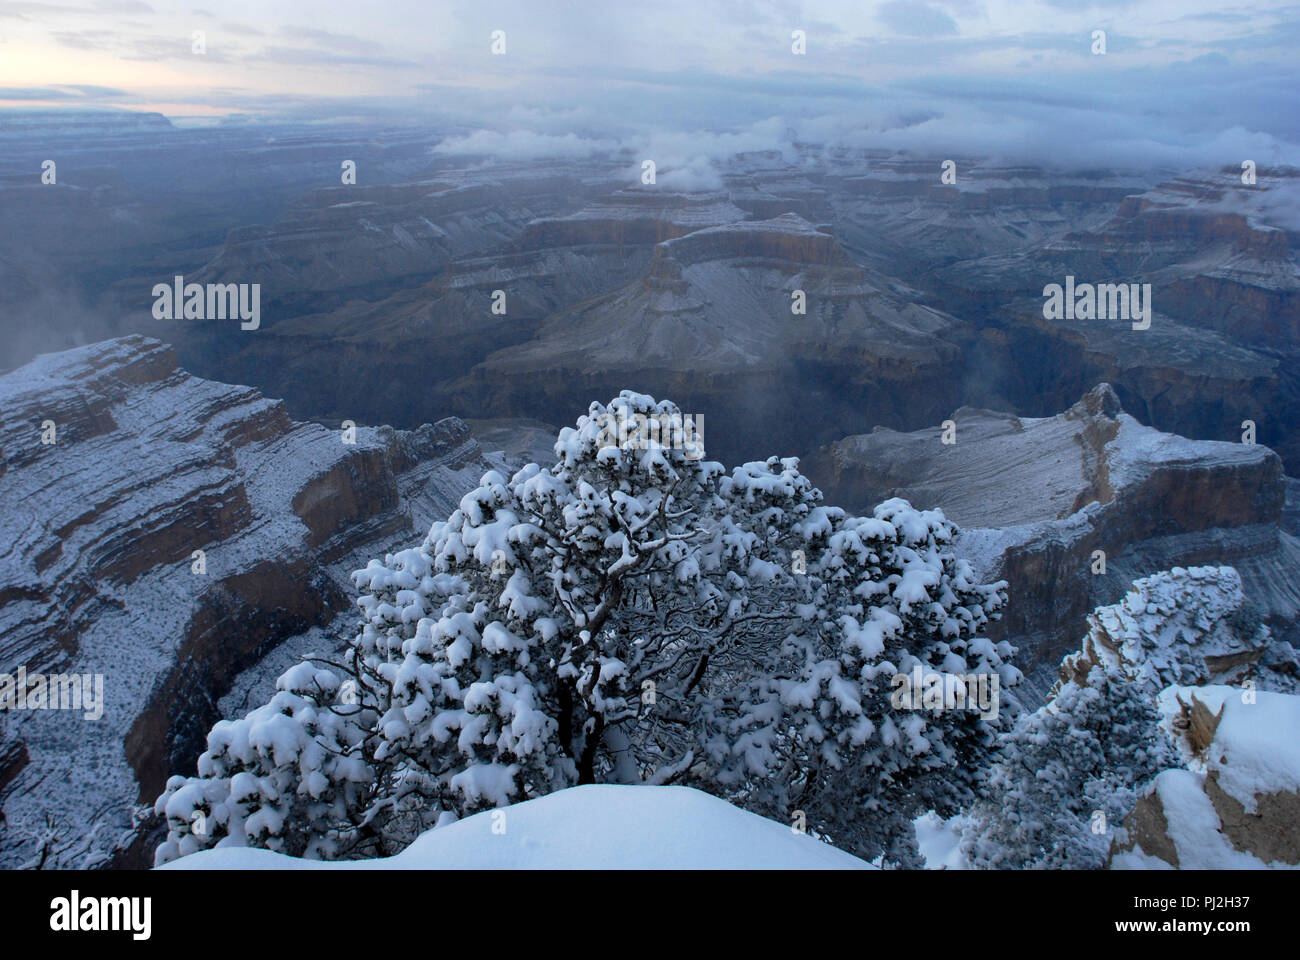 Snow covers the landscape at dusk at the Maricopa Point overlook on the South Rim at Grand Canyon National Park in Arizona. Stock Photo